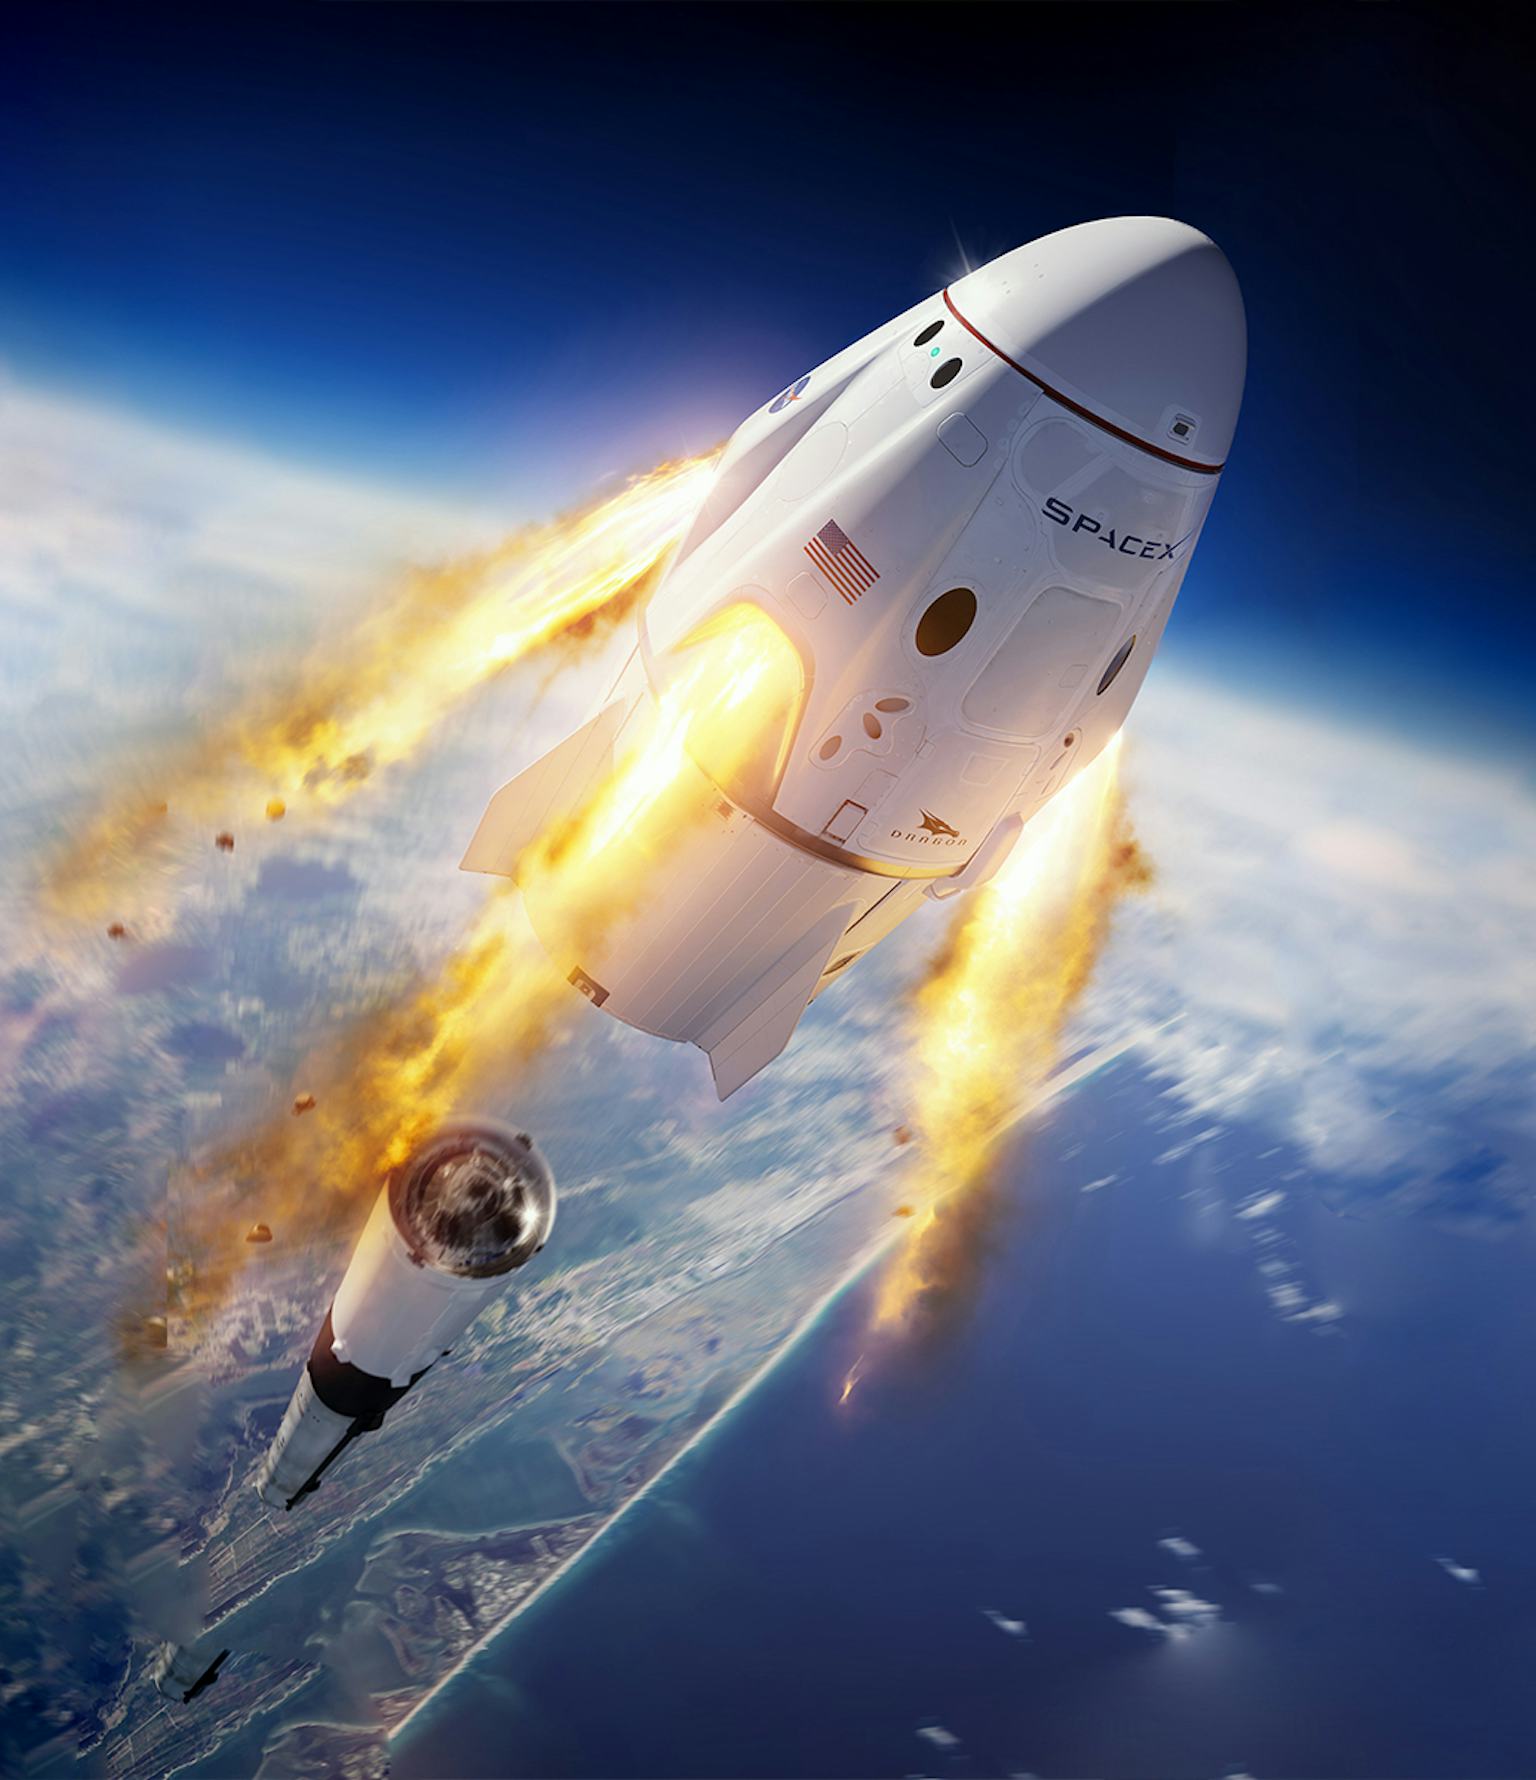 spacex-crew-dragon-astronauts-reveal-big-benefit-over-space-shuttle